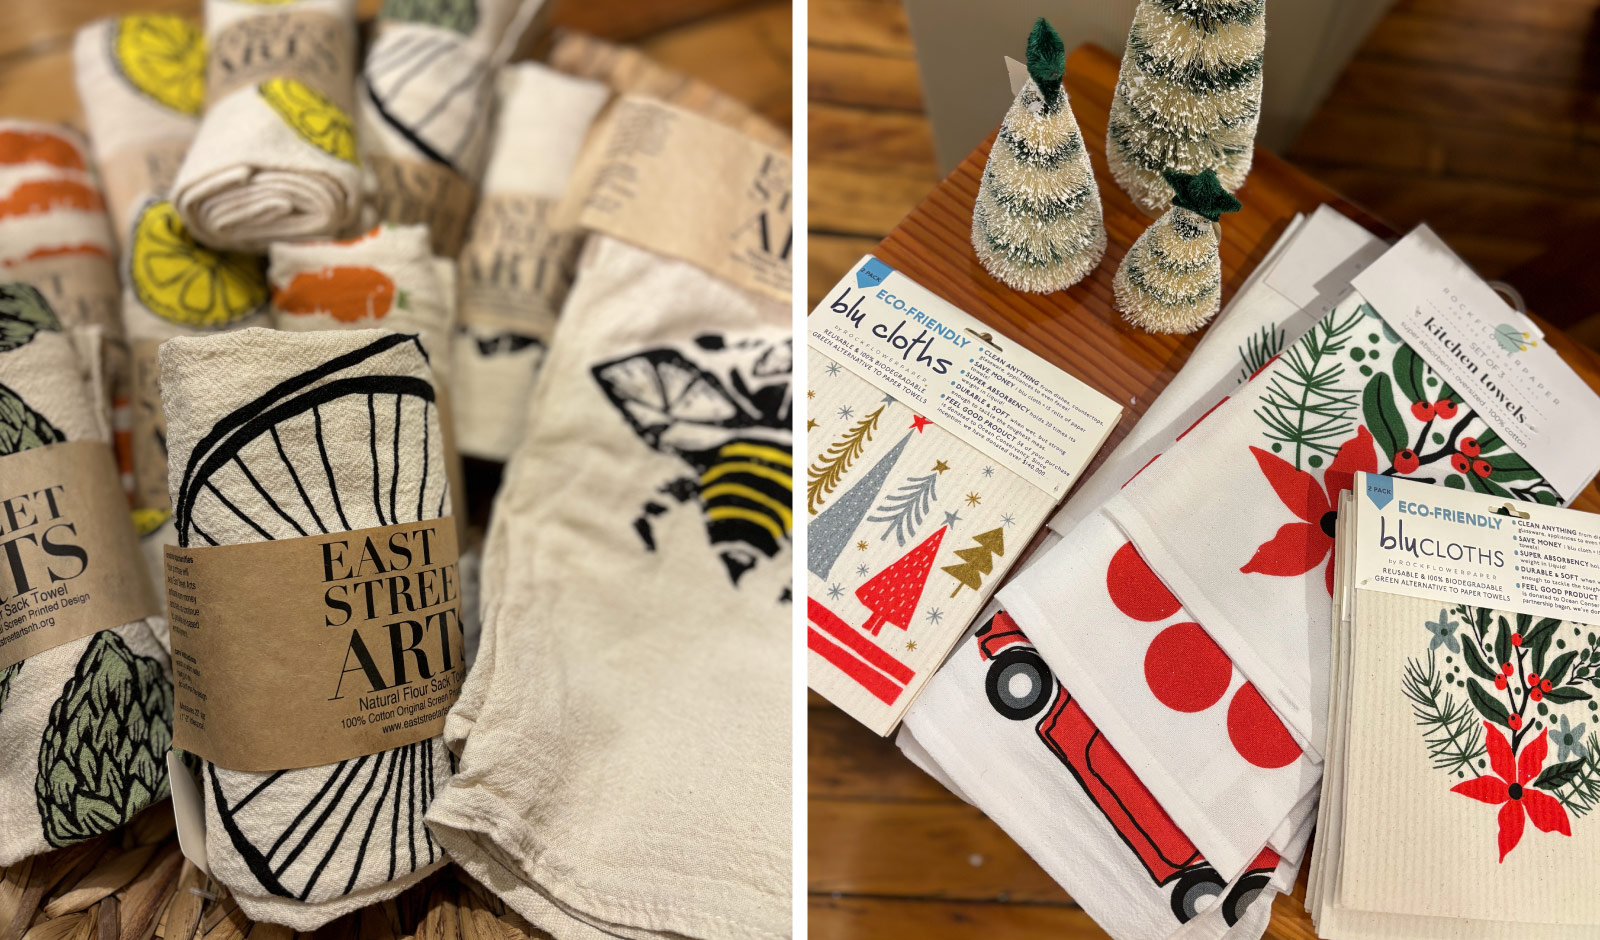 Hand screen printed kitchen towels | Dishtowels and reusable cloths in festive prints